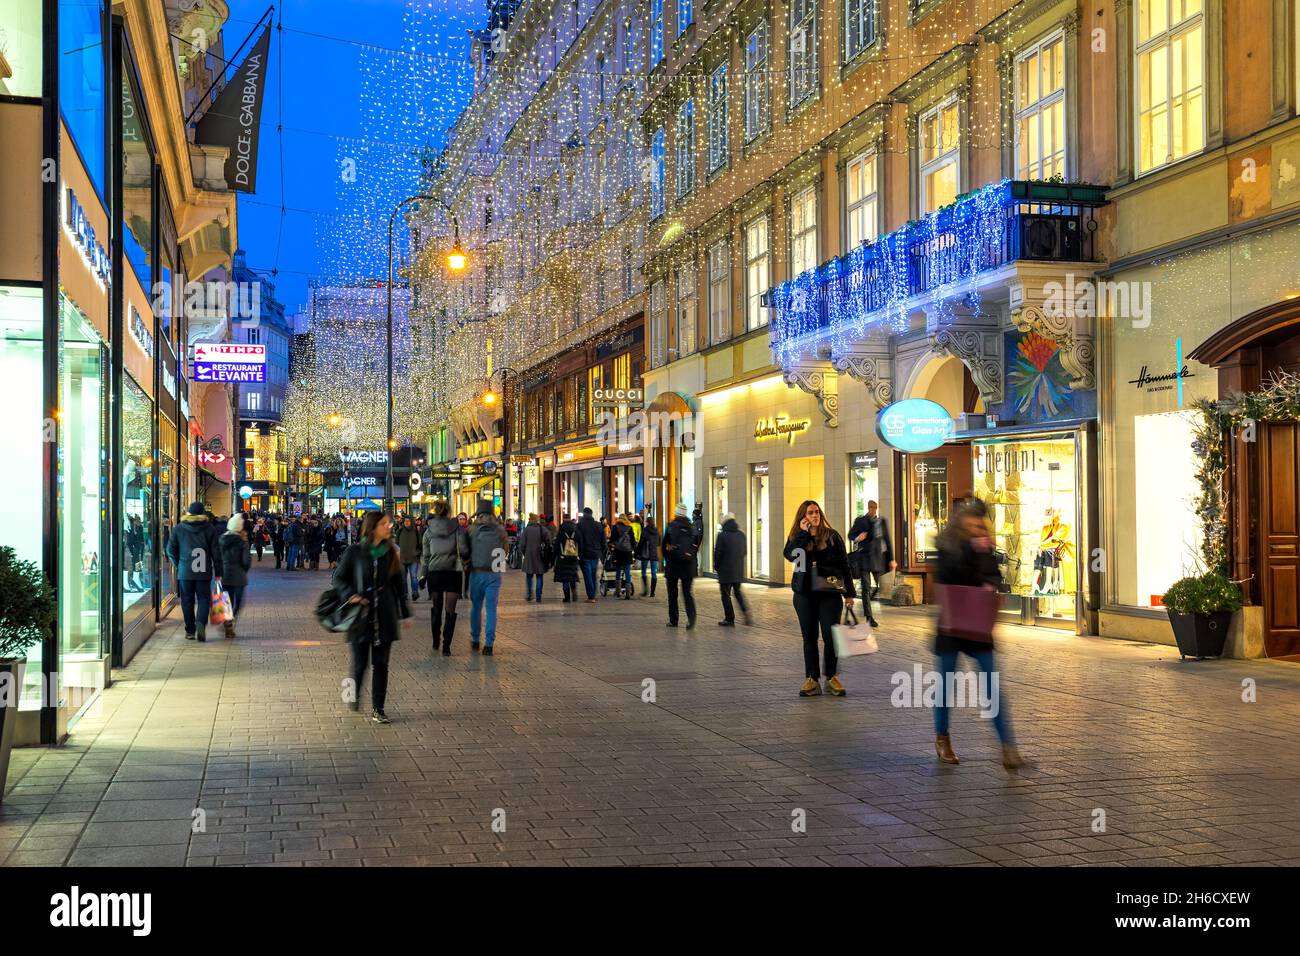 People walking on the street in the city center illuminated and decorated for Christmas holidays in Vienna, Austria. Stock Photo